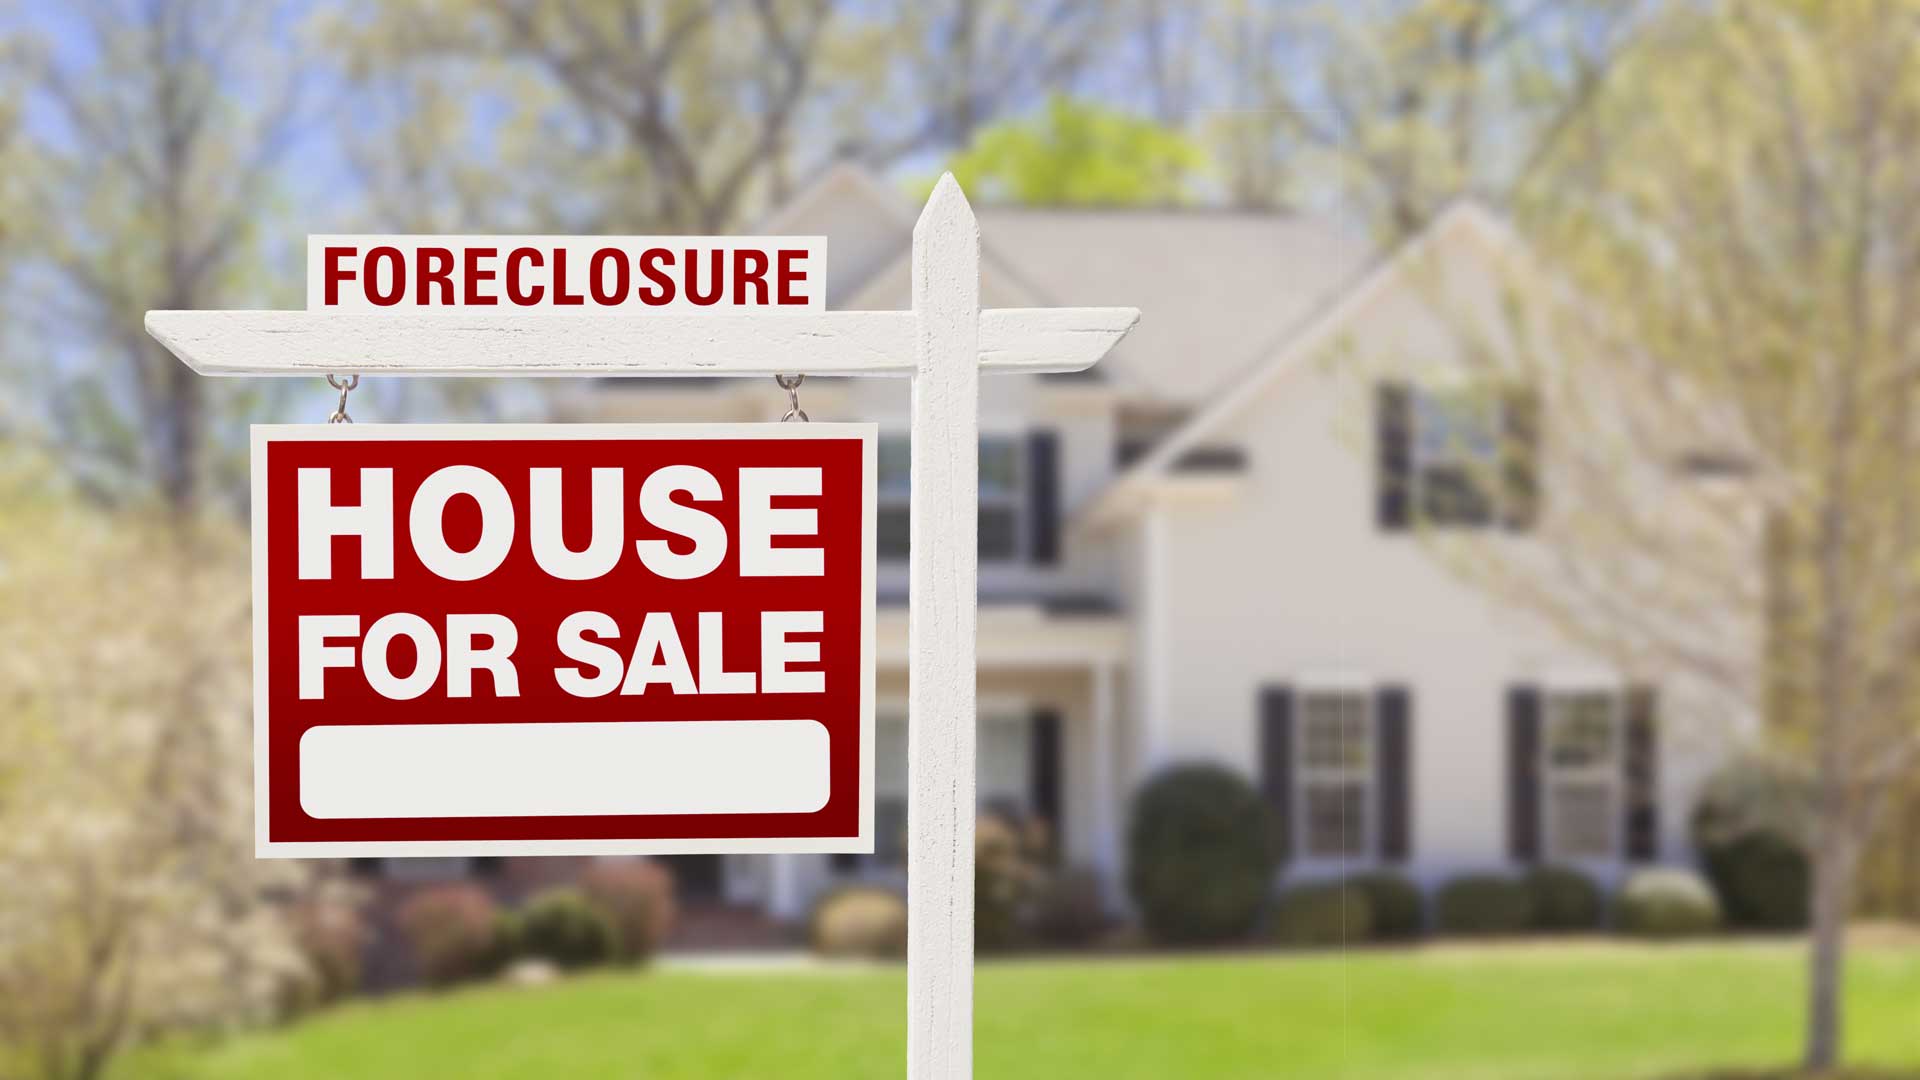 9-Things-You-Need-to-Know-When-Buying-a-Home-in-Foreclosure-by-MFM-Blog